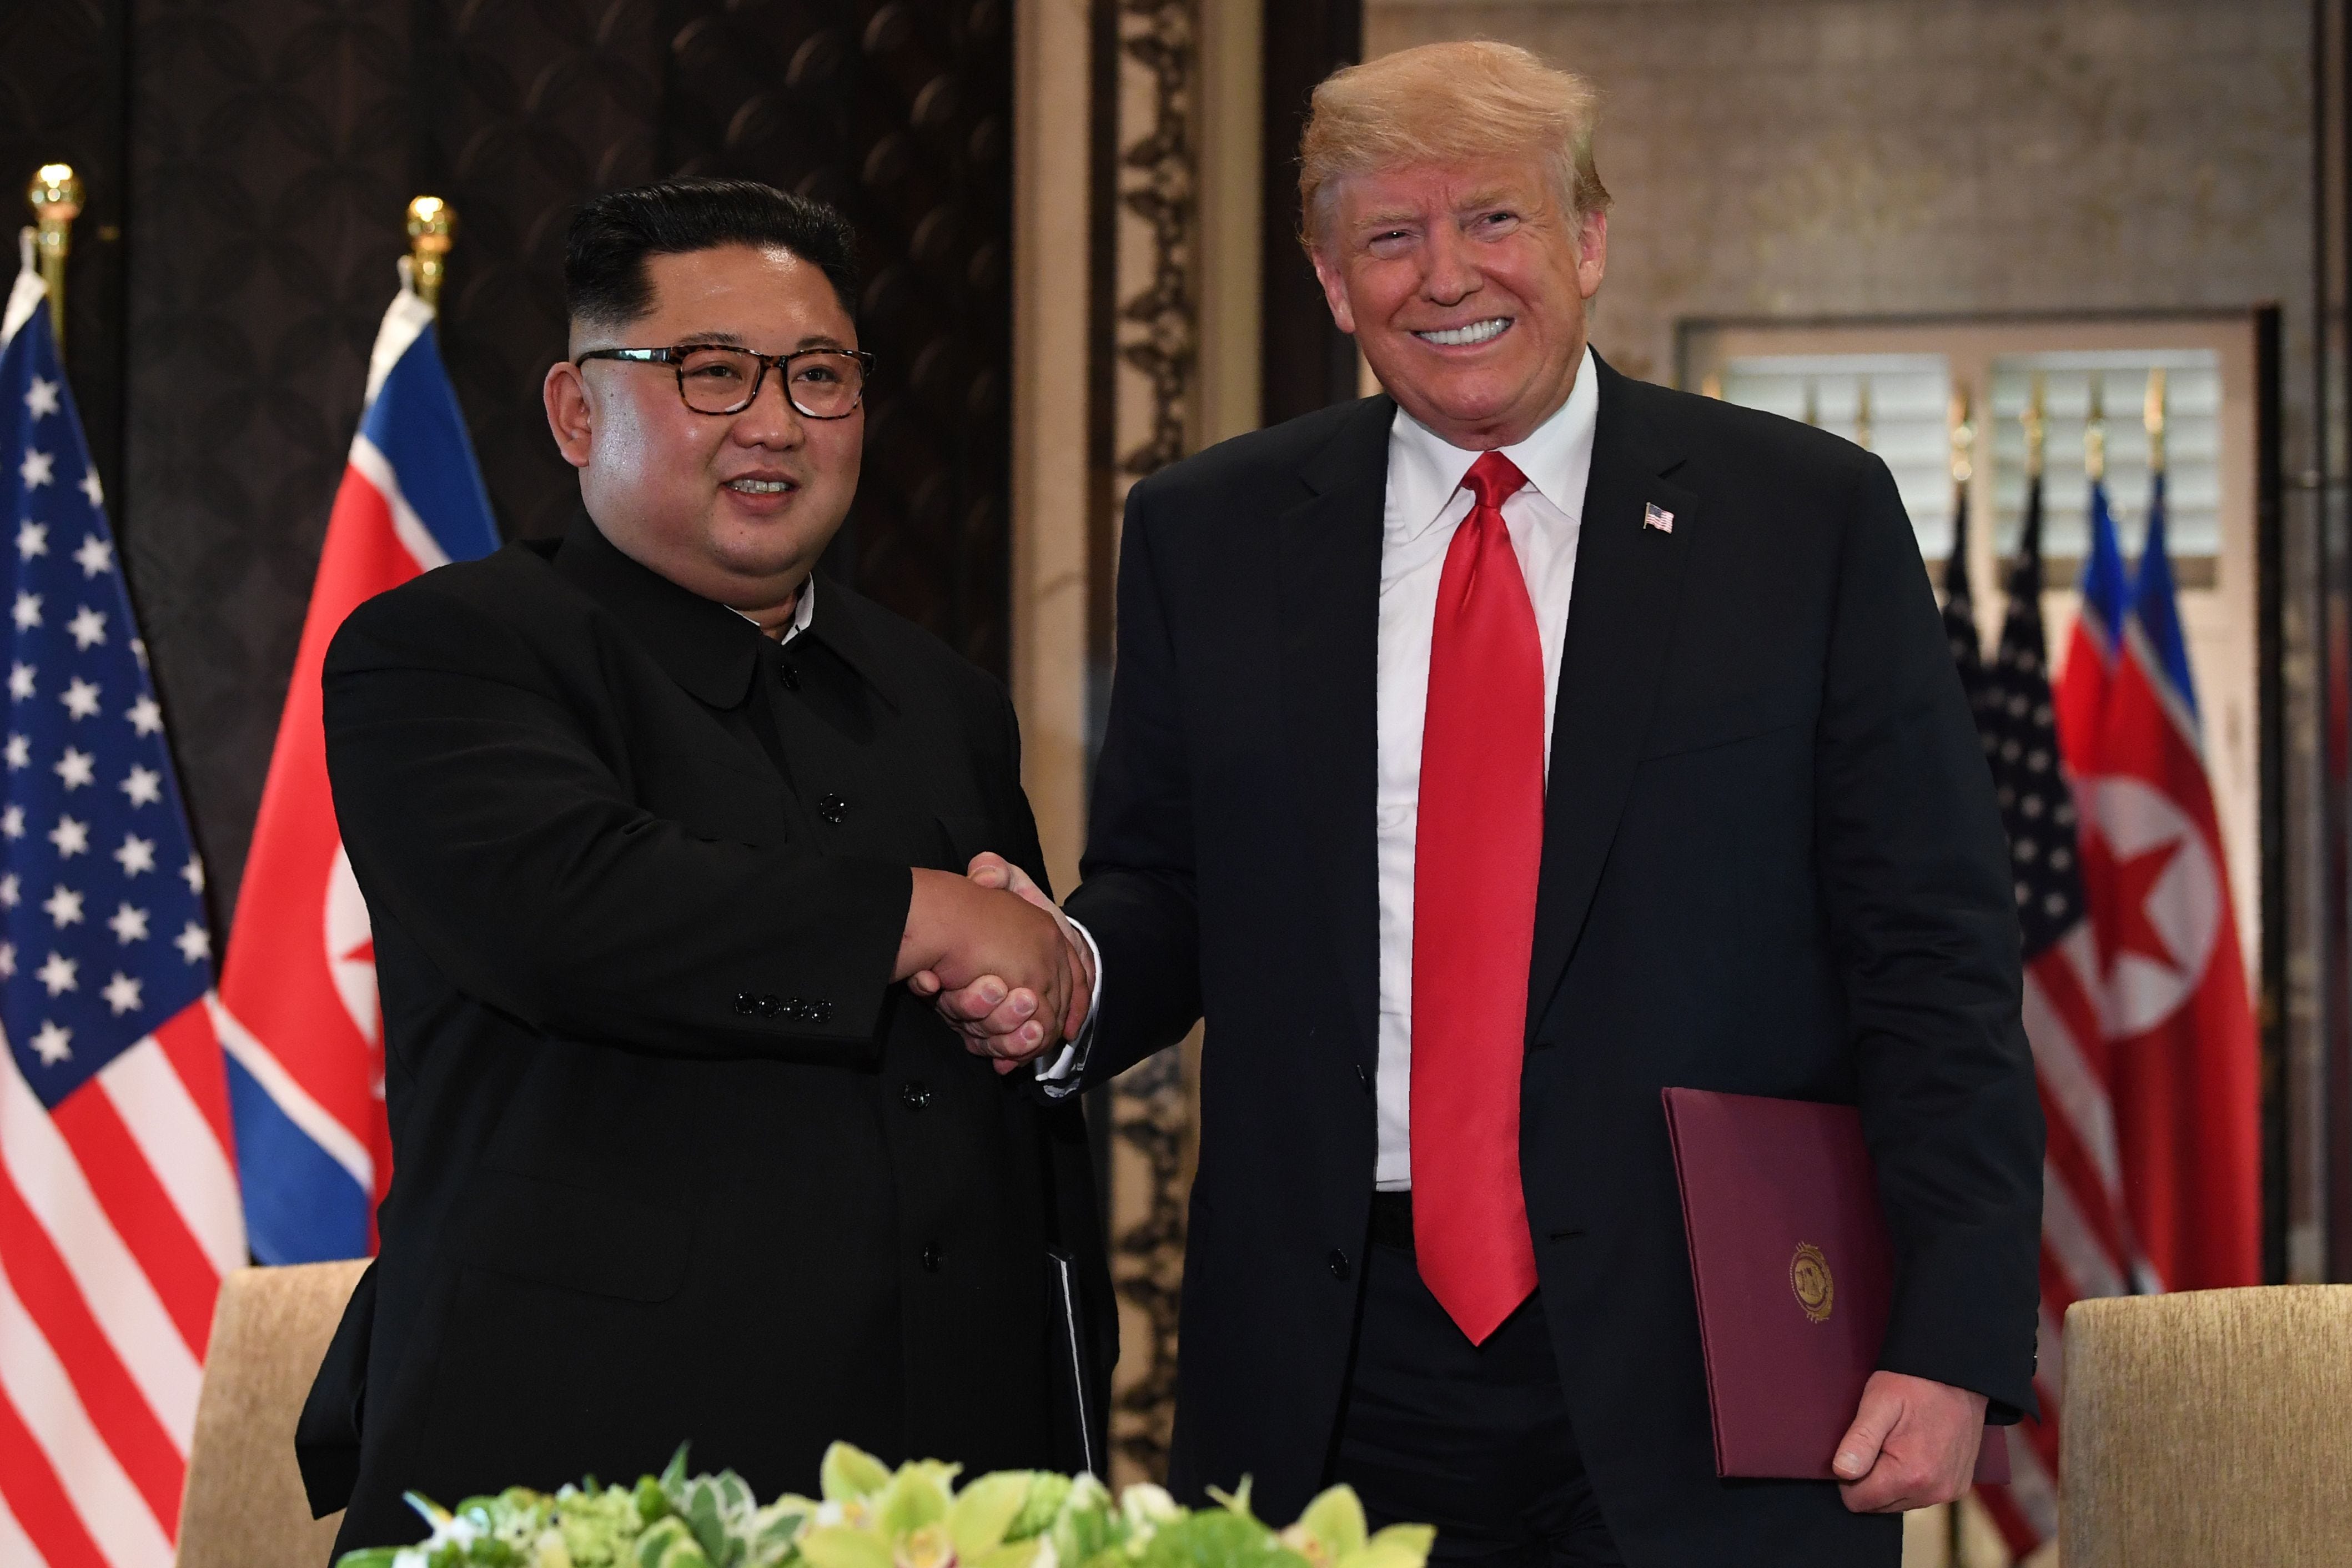 President Trump and North Korea's leader Kim Jong Un shake hands following a signing ceremony during their historic US-North Korea summit, at the Capella Hotel on Sentosa island in Singapore on June 12, 2018.  Trump and North Korean leader Kim Jong Un